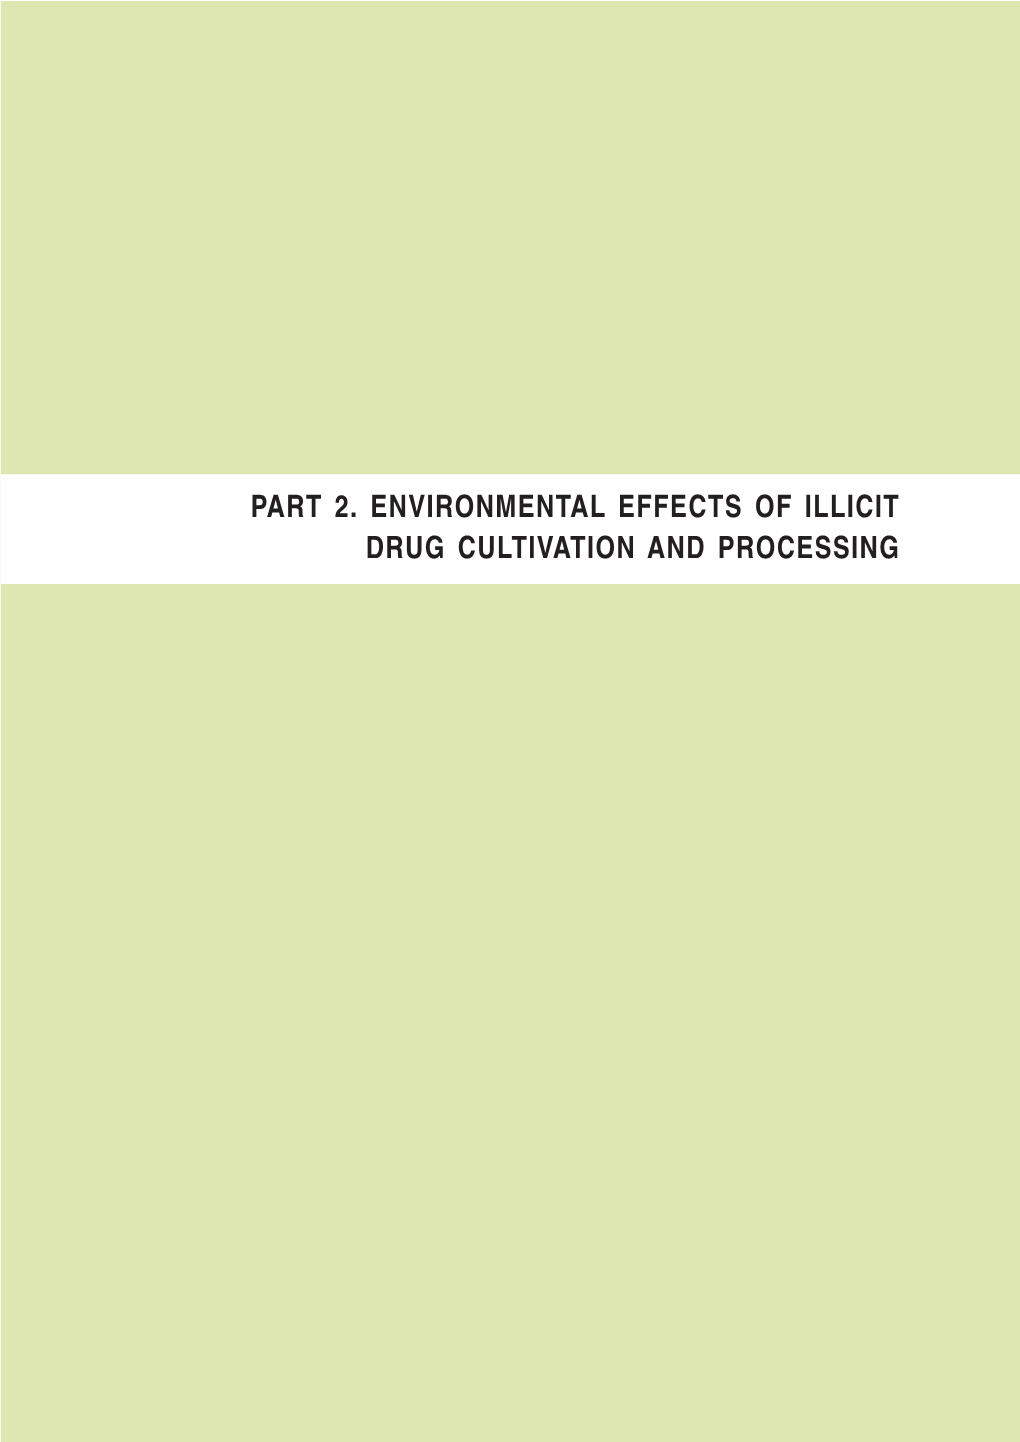 Part 2. Environmental Effects of Illicit Drug Cultivation and Processing